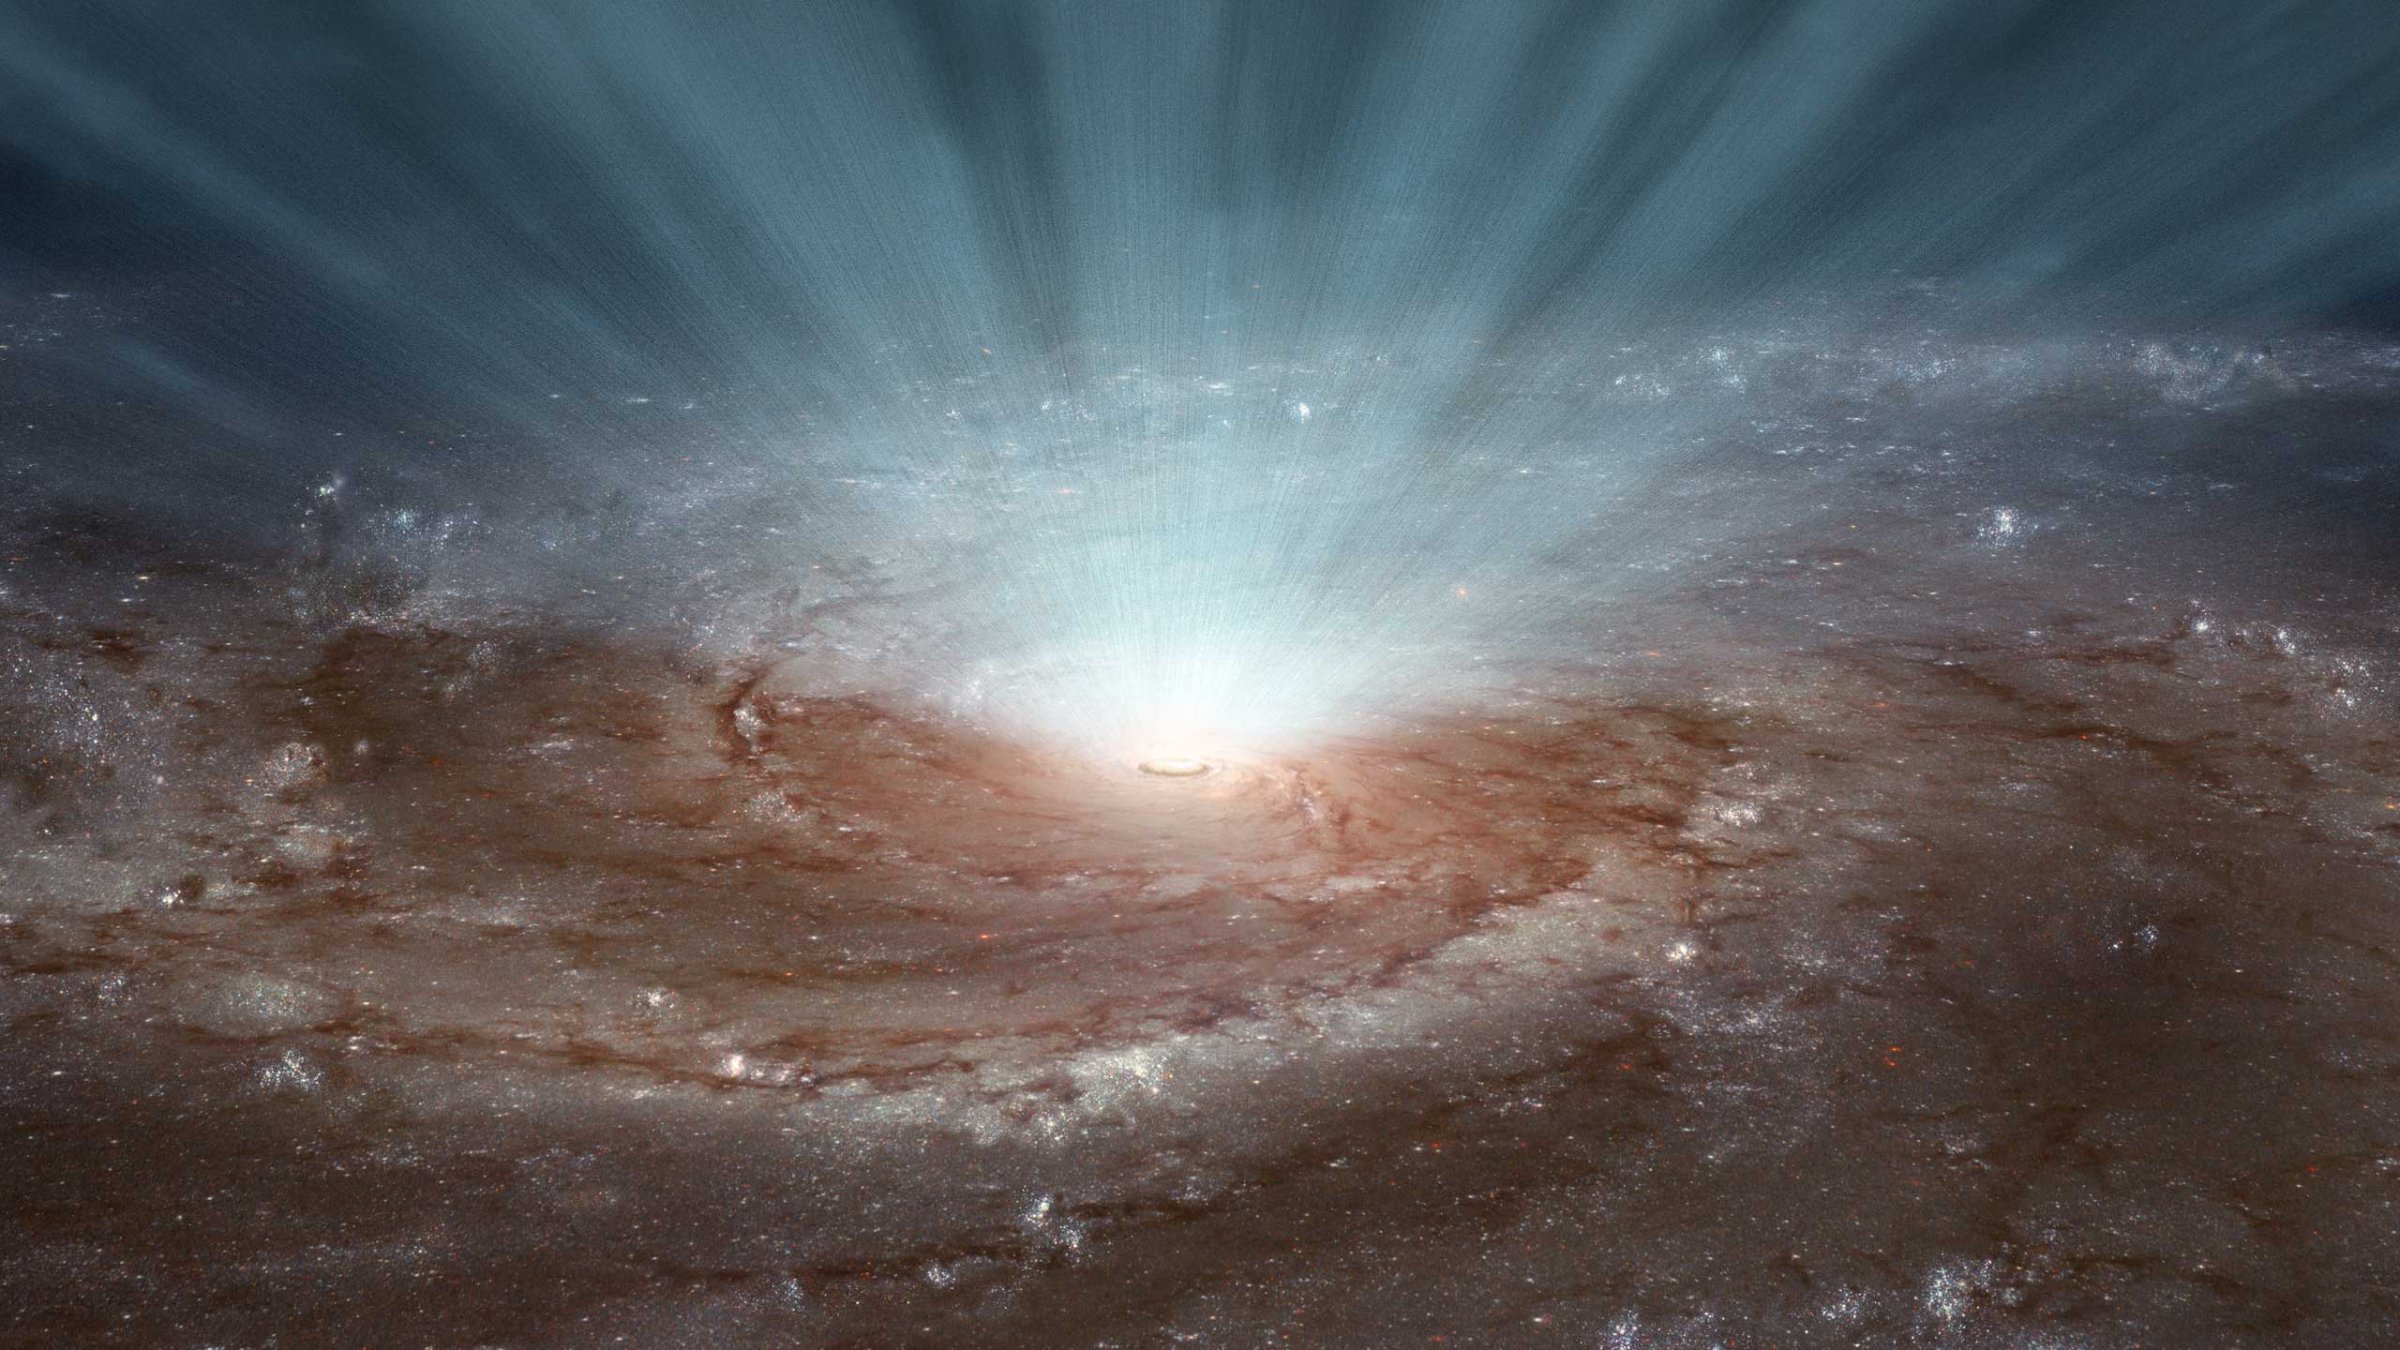 Supermassive black holes at the cores of galaxies blast out radiation and ultra-fast winds, as illustrated in this artist's conception.